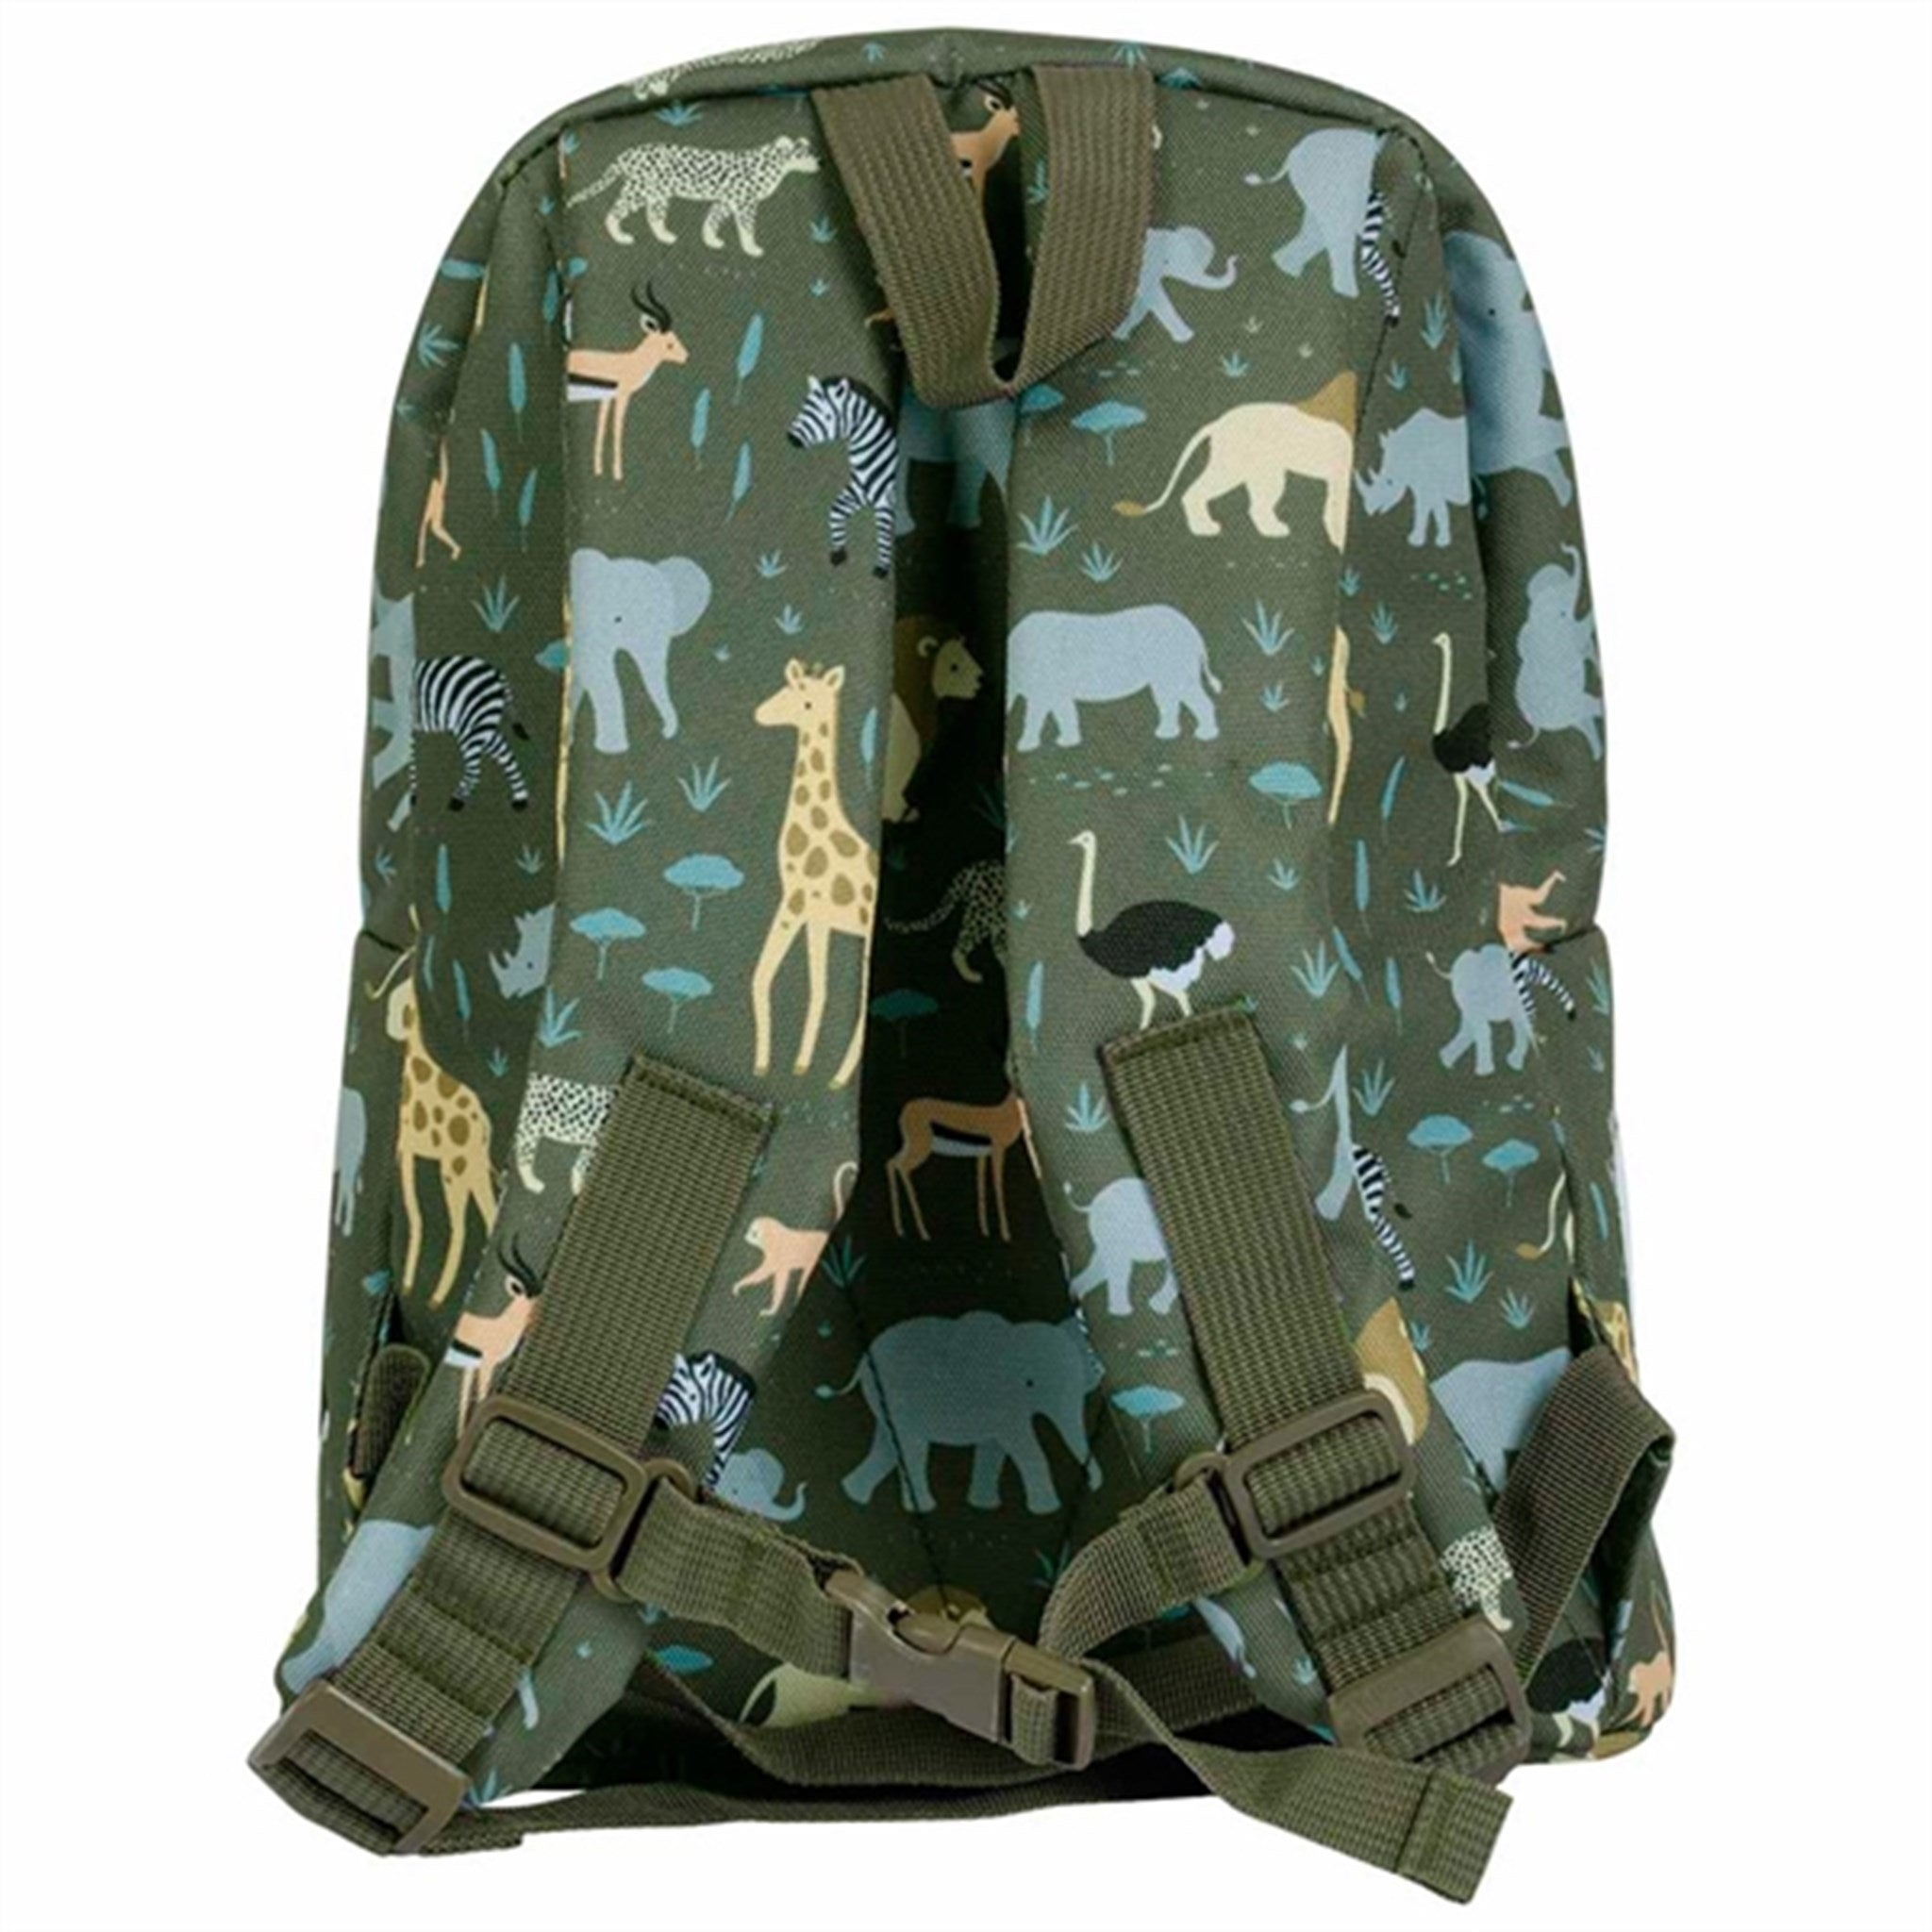 A Little Lovely Company Backpack Small Savanna 3